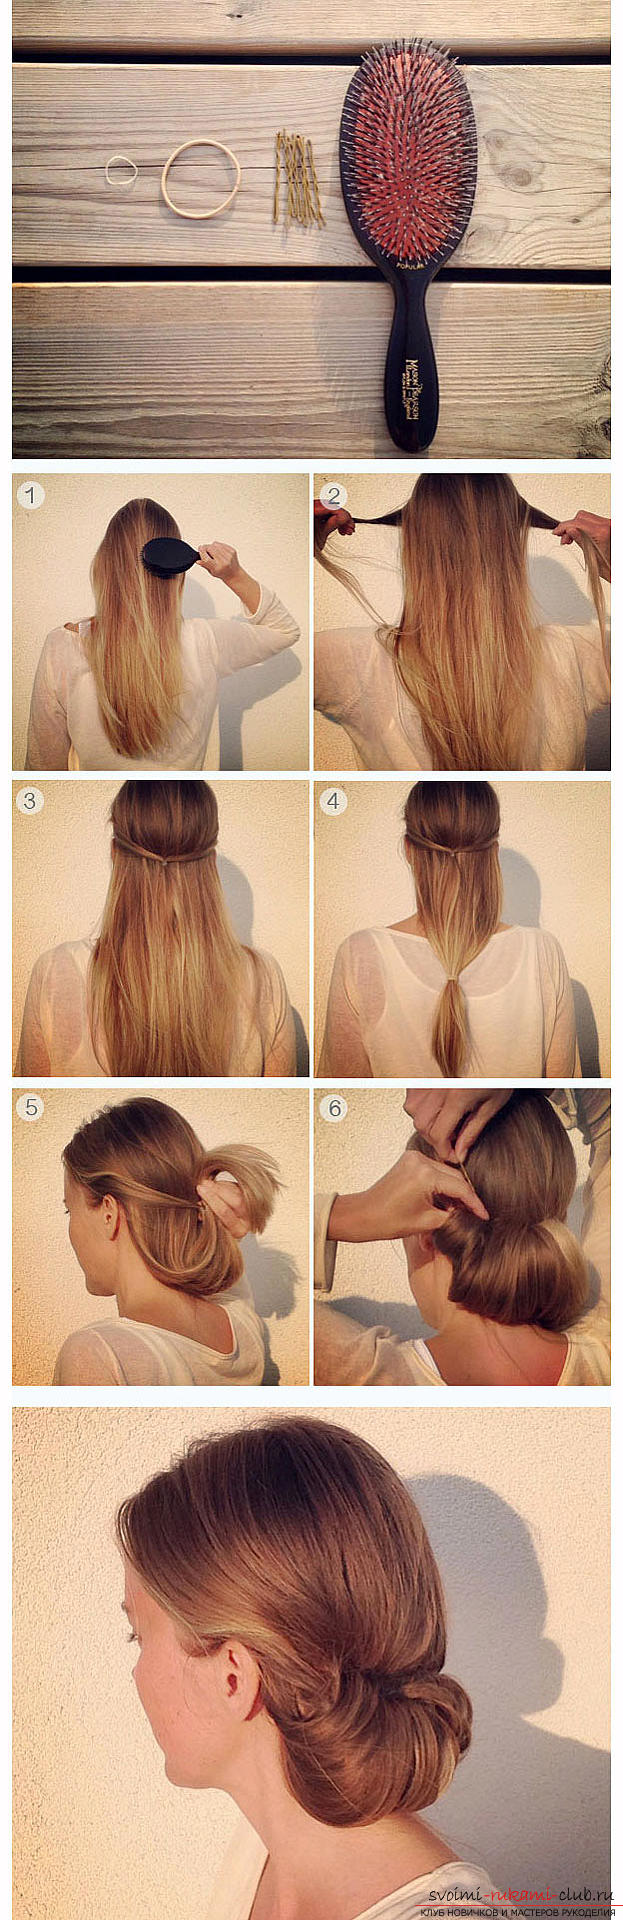 Tips and advice on creating original hairstyles in school in 5 minutes with your own hands .. Photo # 3